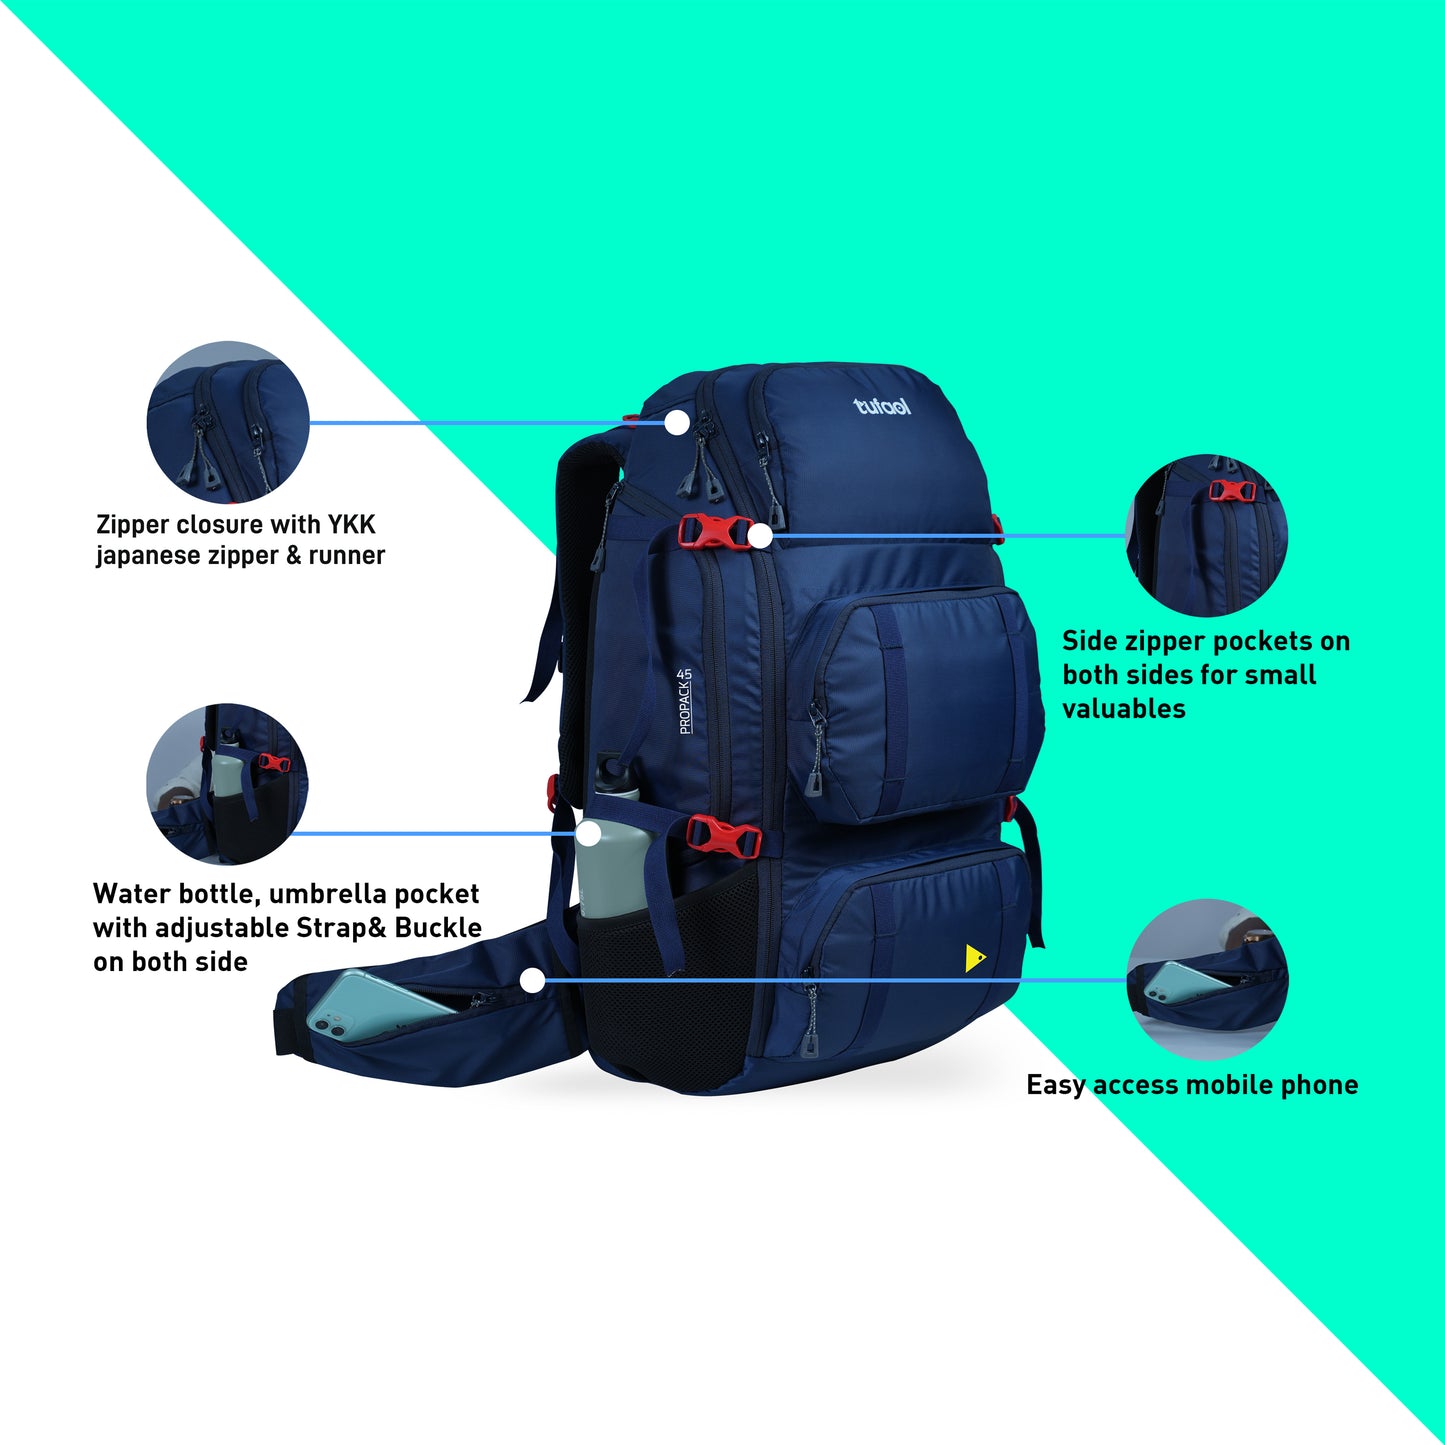 TUFAOL PROPACK 45 Liter Backpack For Trekking, Camping, Business Or Leisure Travel (Navy Blue)